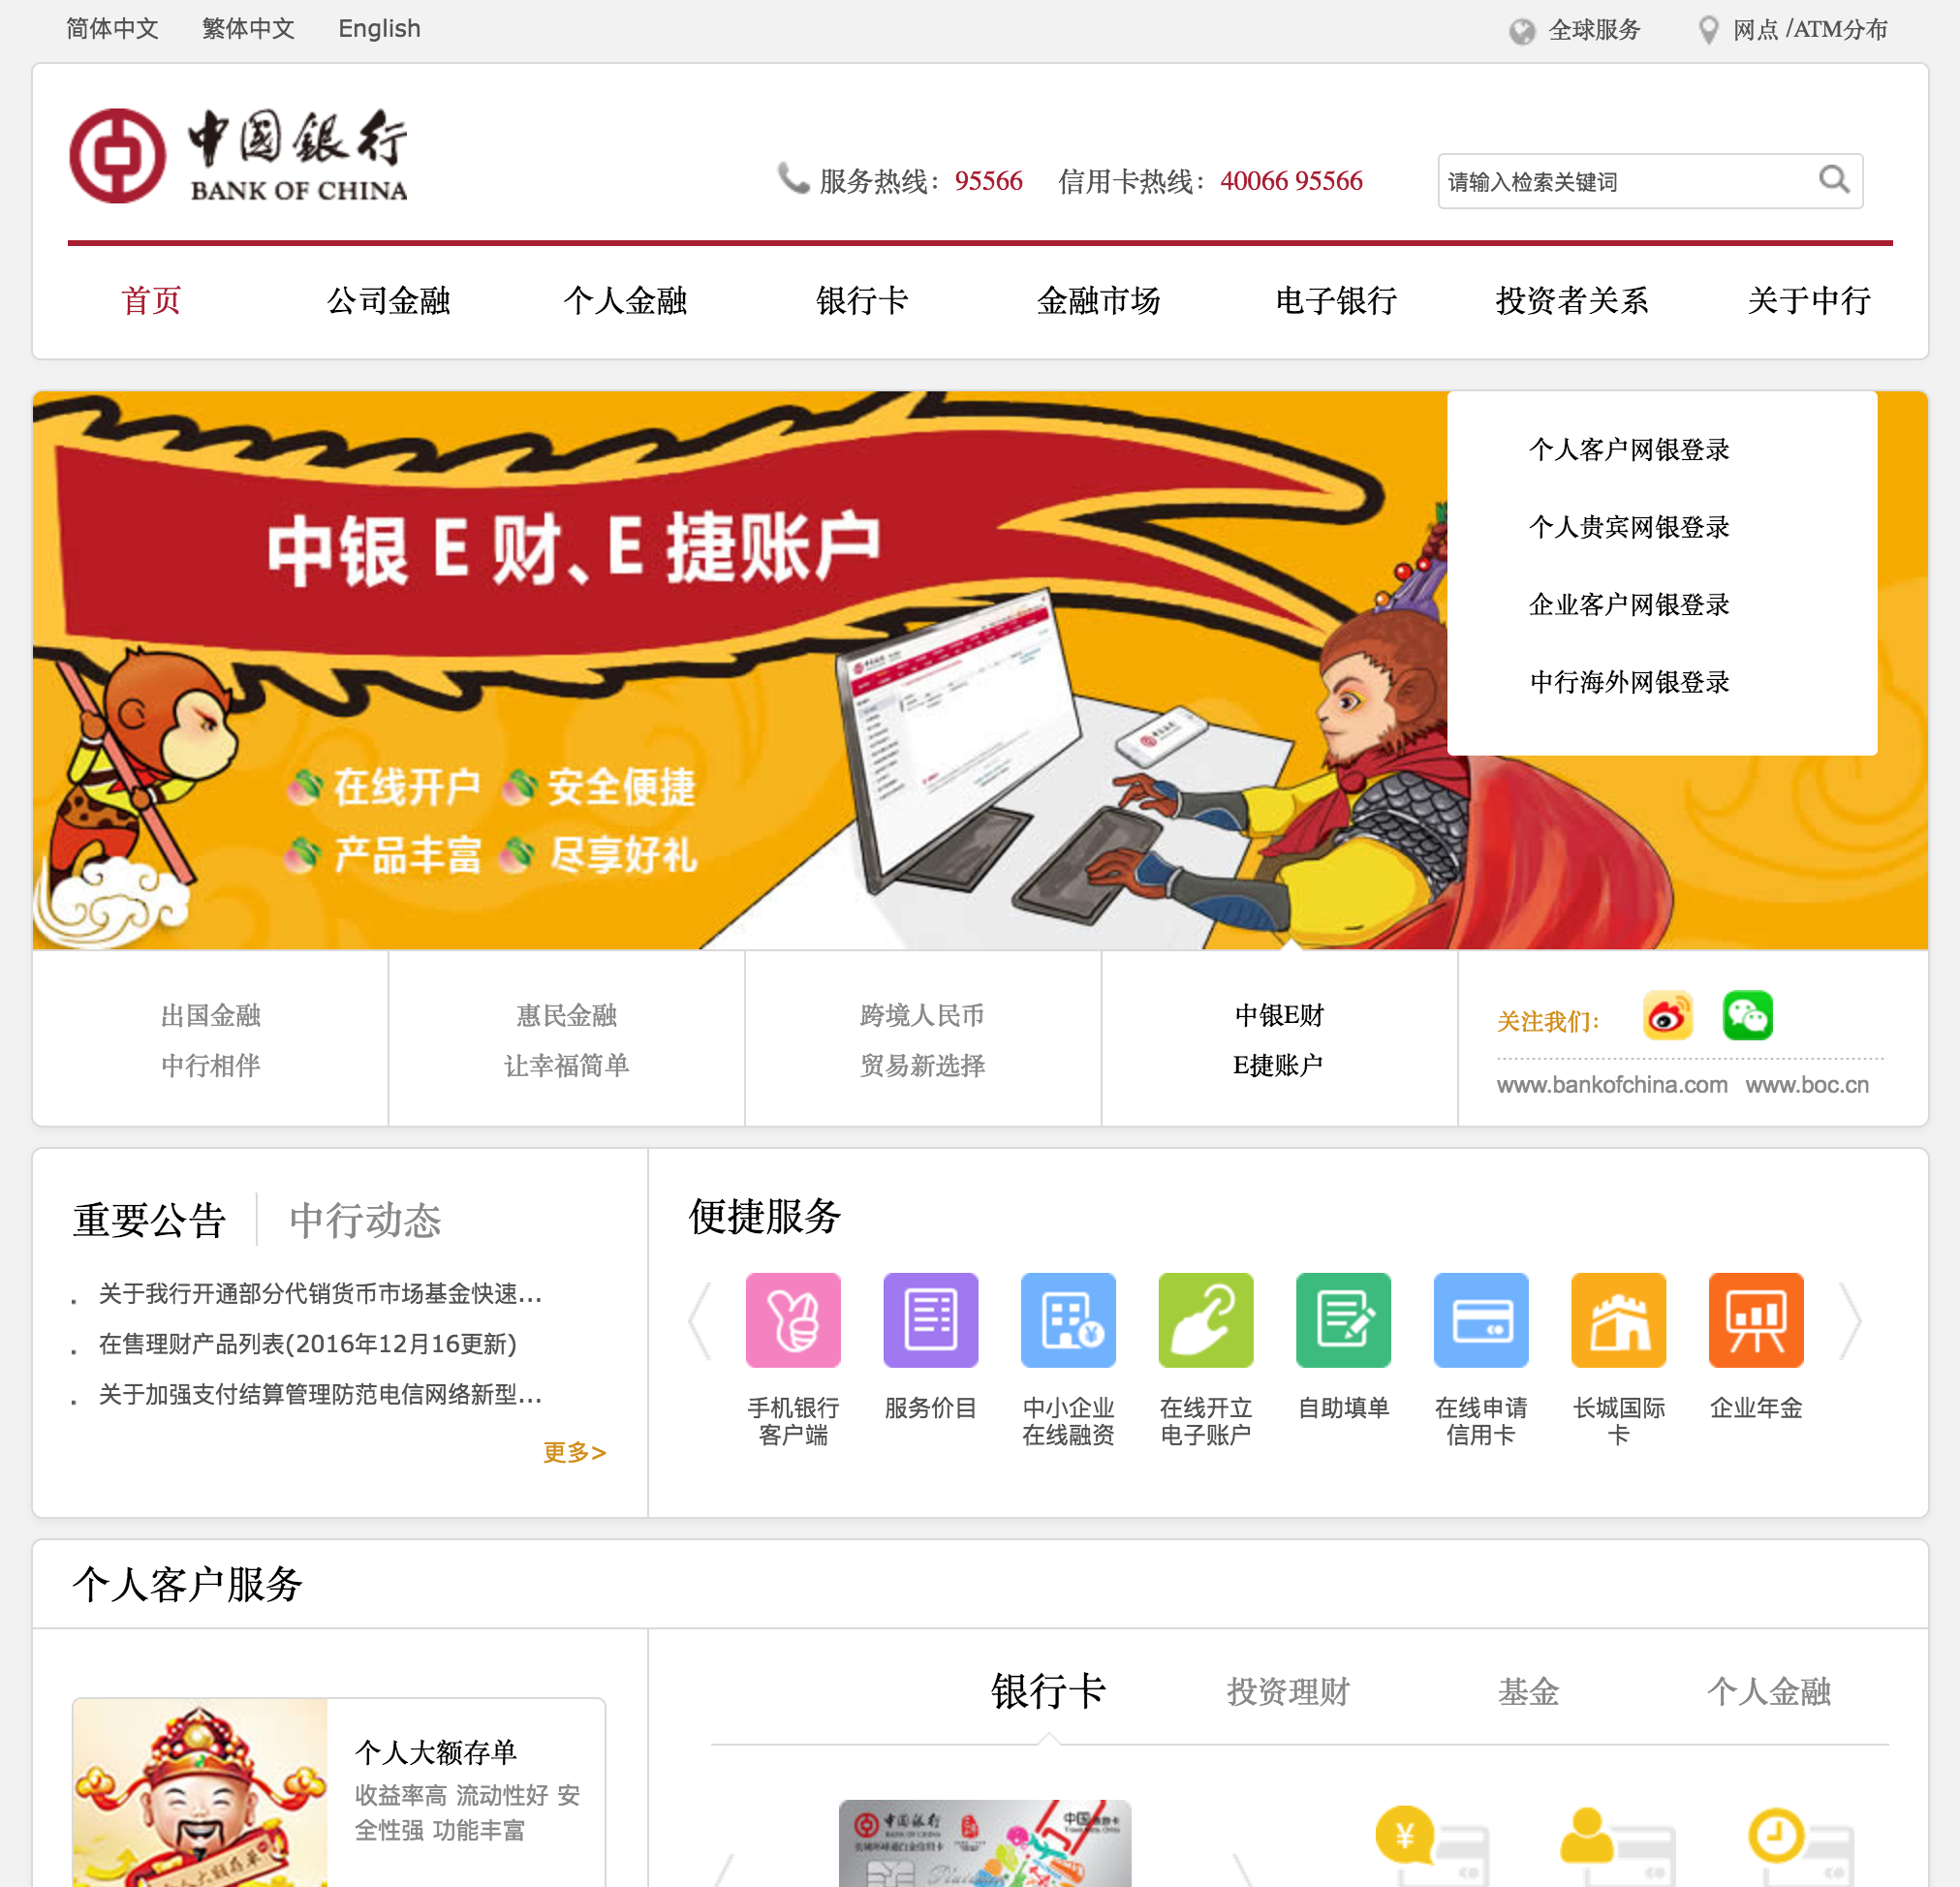 Bank of China using red in small parts of their website, branding and imagery